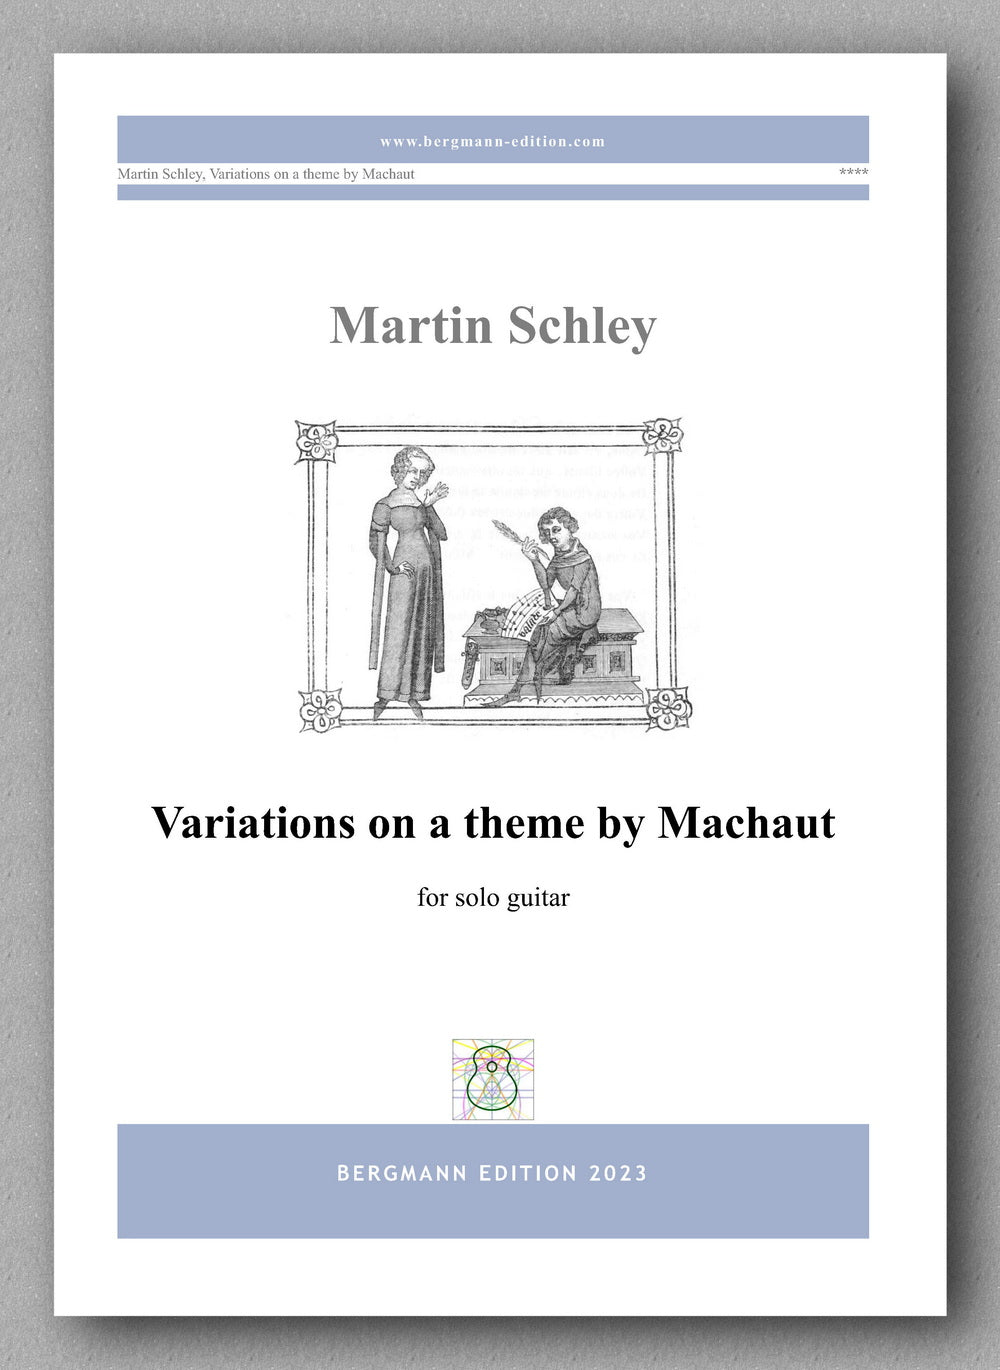 Martin Schley, Variations on a theme by Machaut - preview of the cover